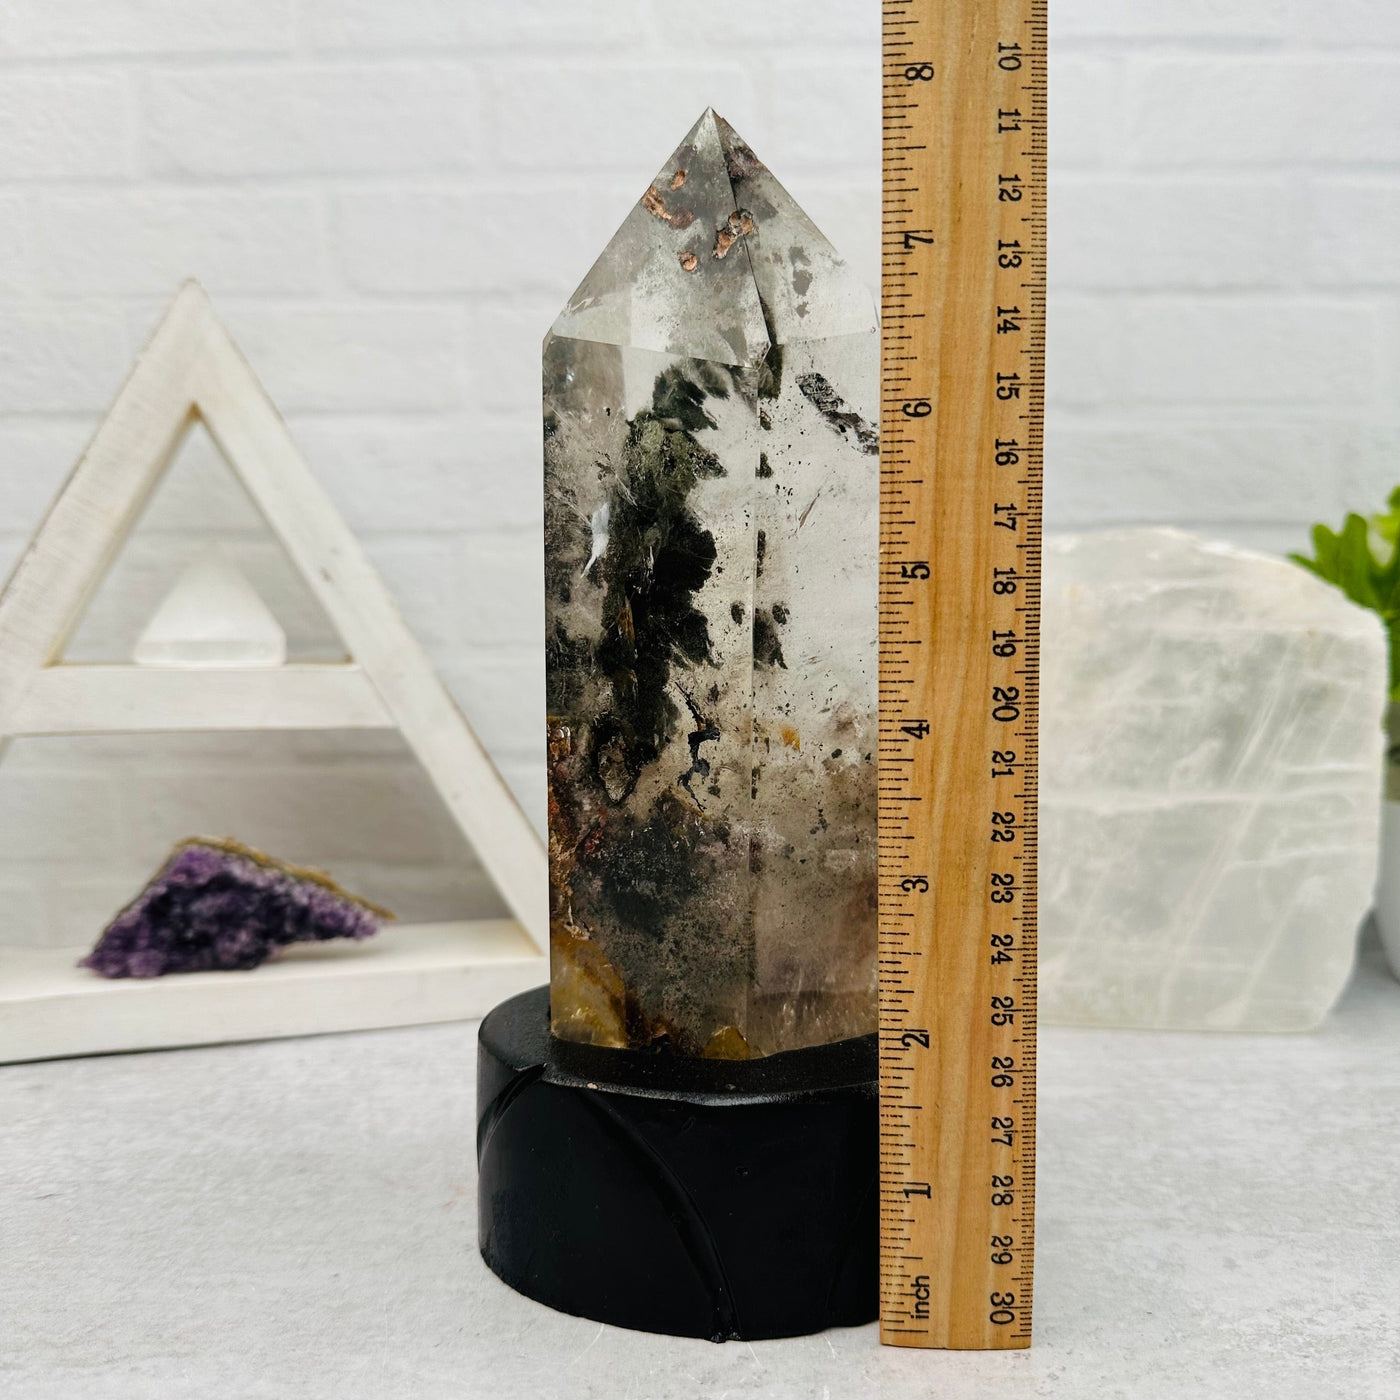  Lodolite Quartz on Wooden Stand next to a ruler for size reference 